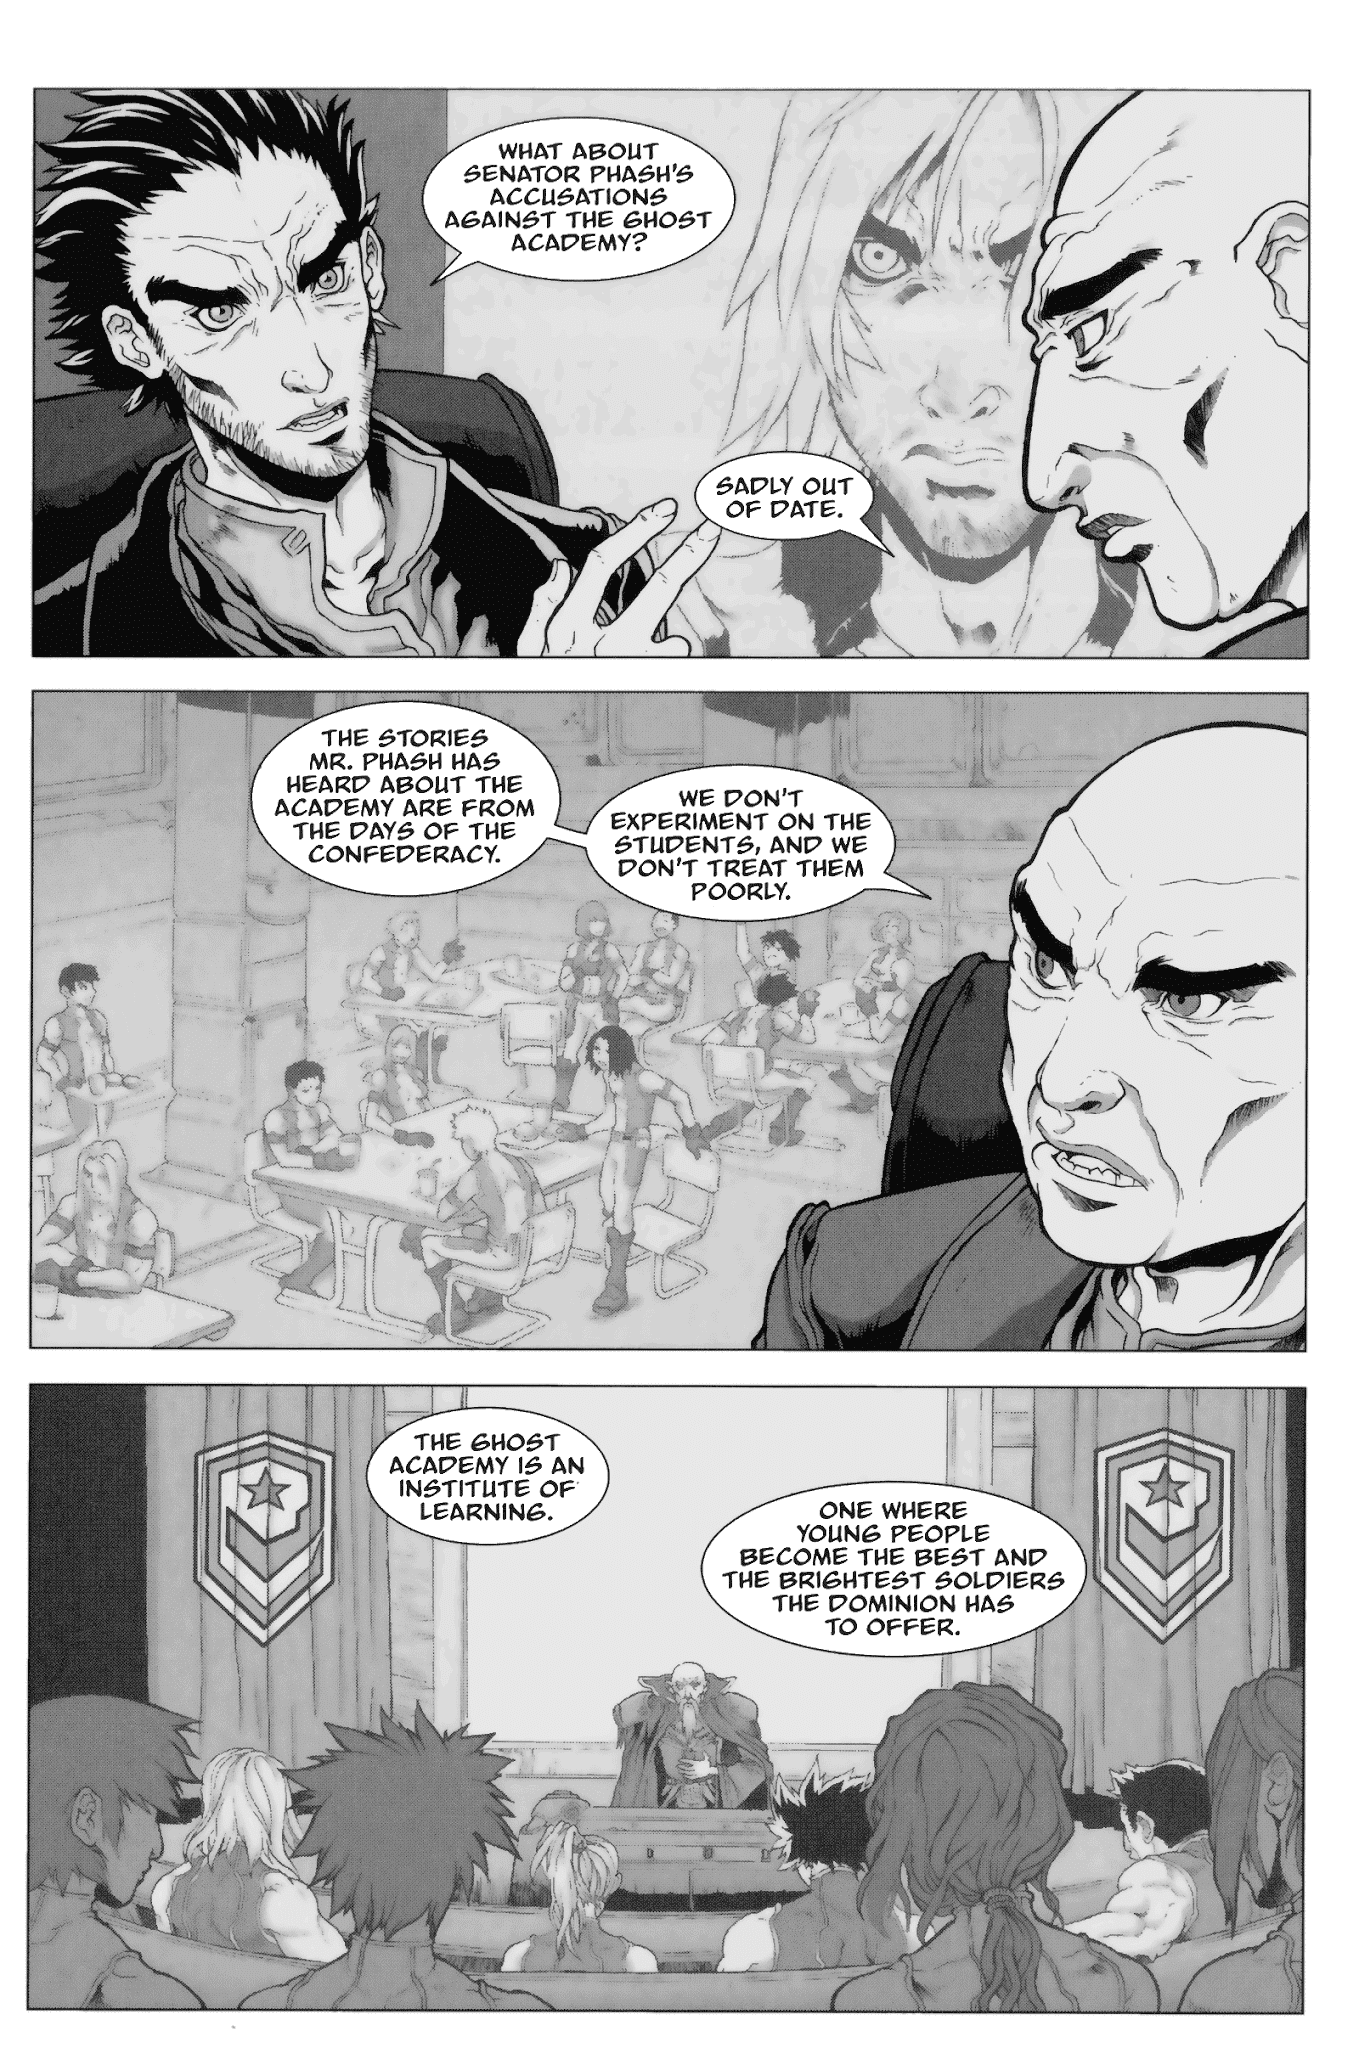 Read online StarCraft: Ghost Academy comic -  Issue # TPB 1 - 13